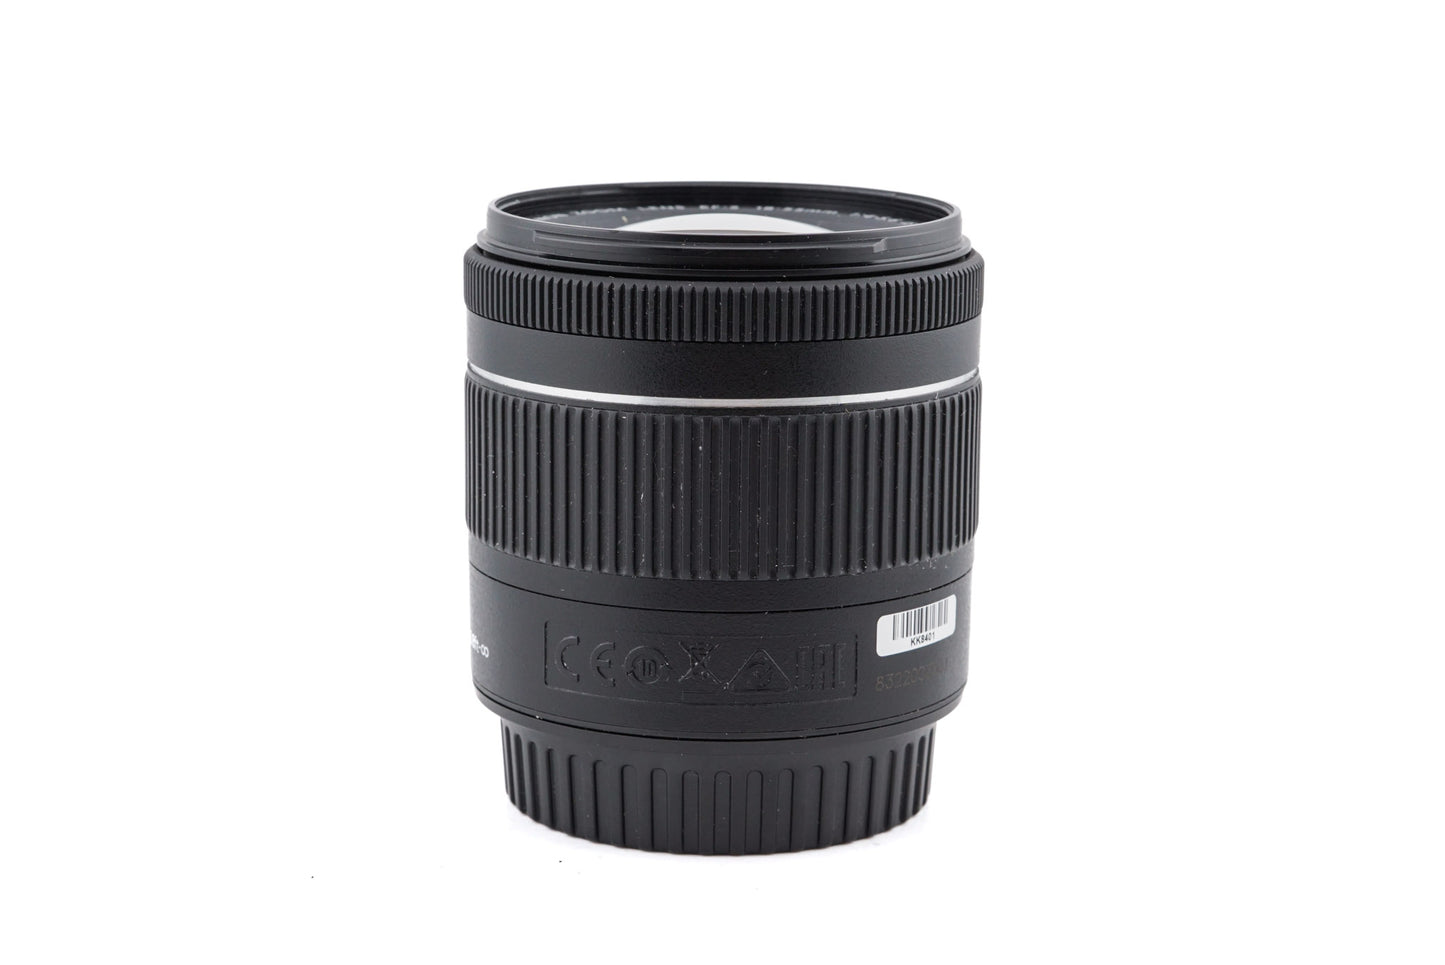 Canon 18-55mm f4-5.6 IS STM